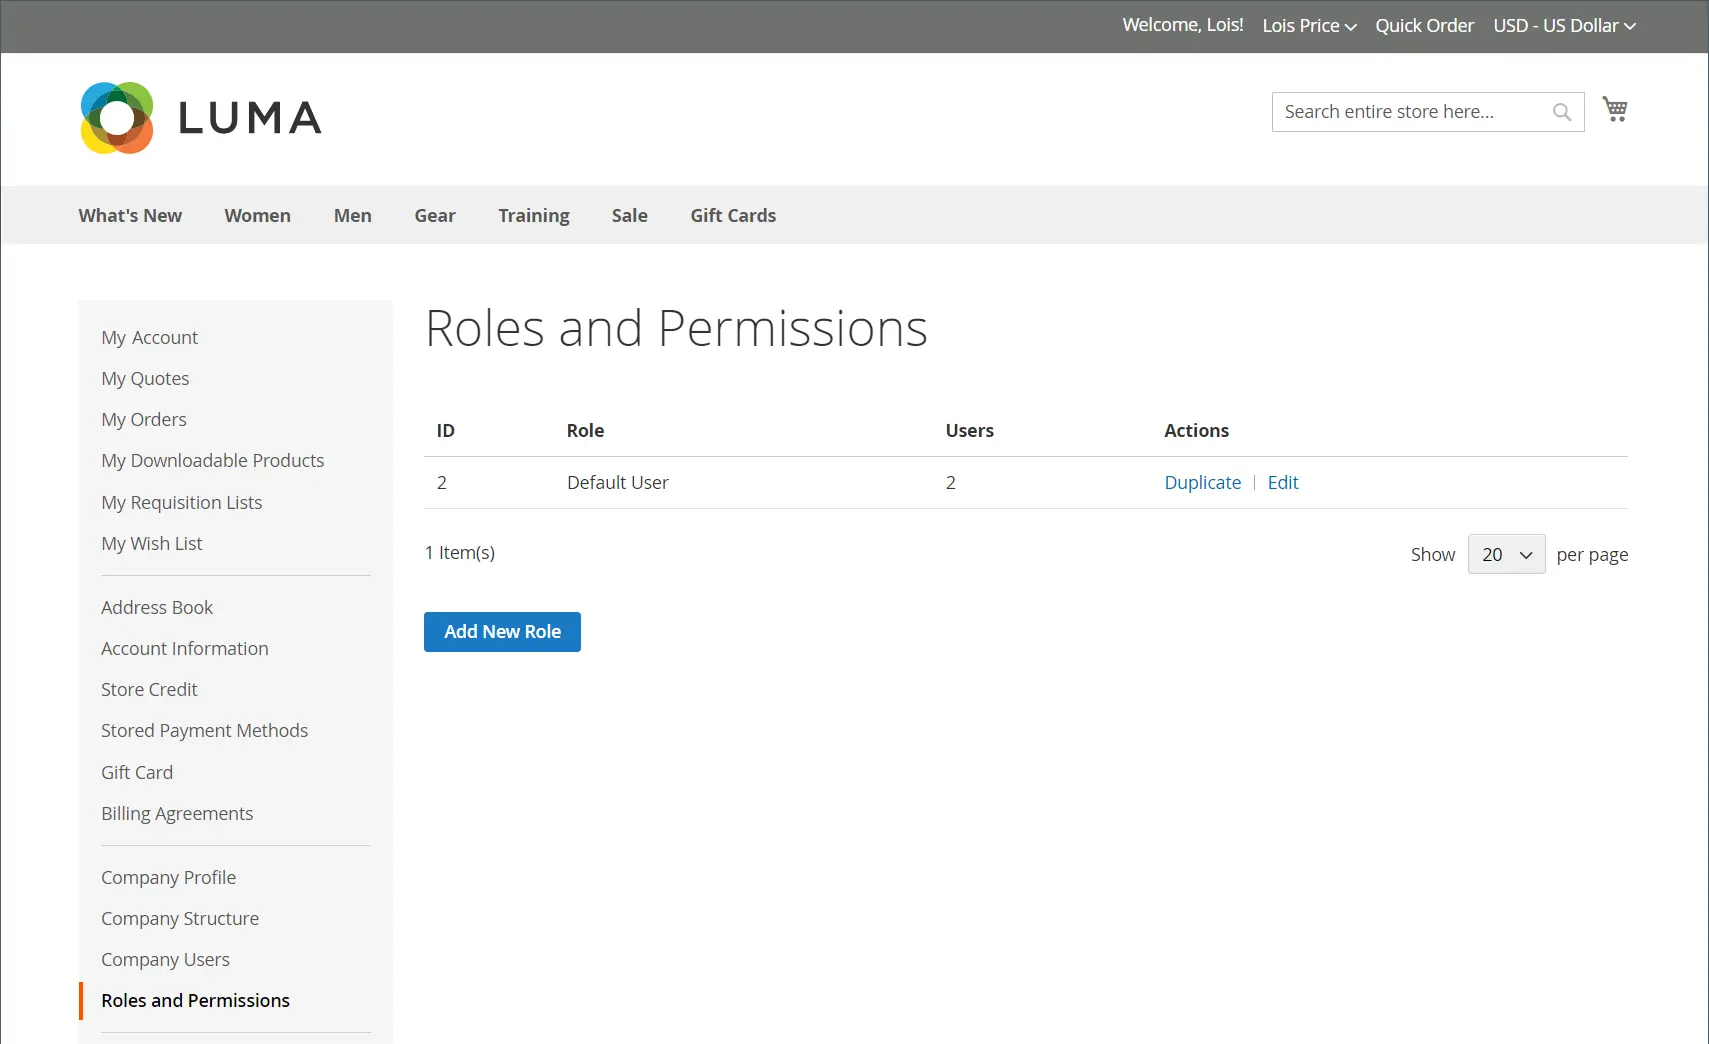 Roles and Permissions page with default role